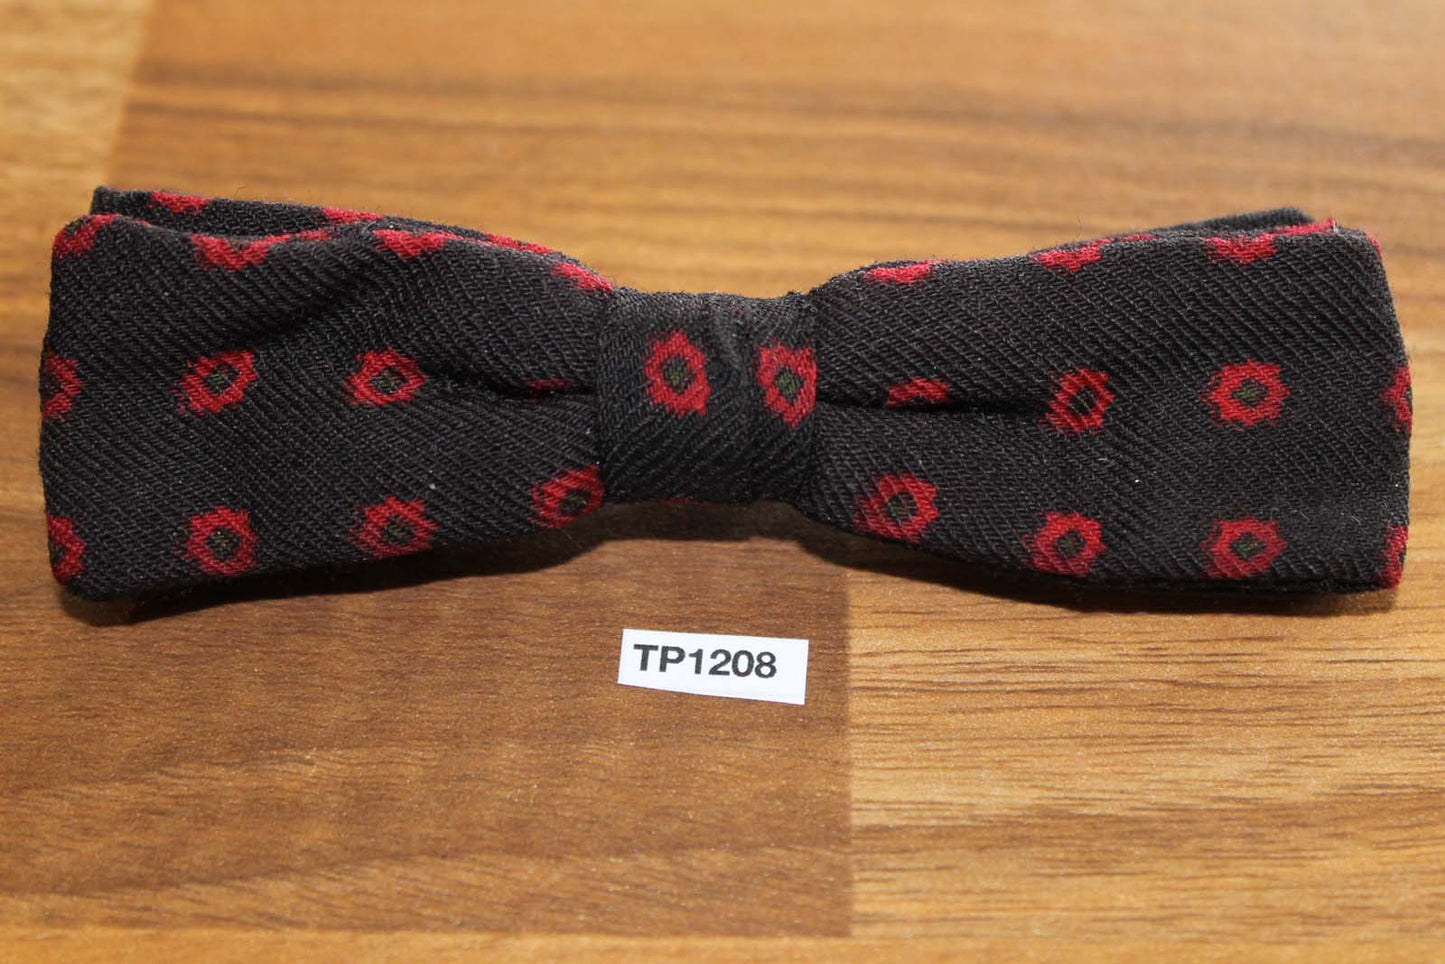 Vintage black red repeat pattern clip on bow tie